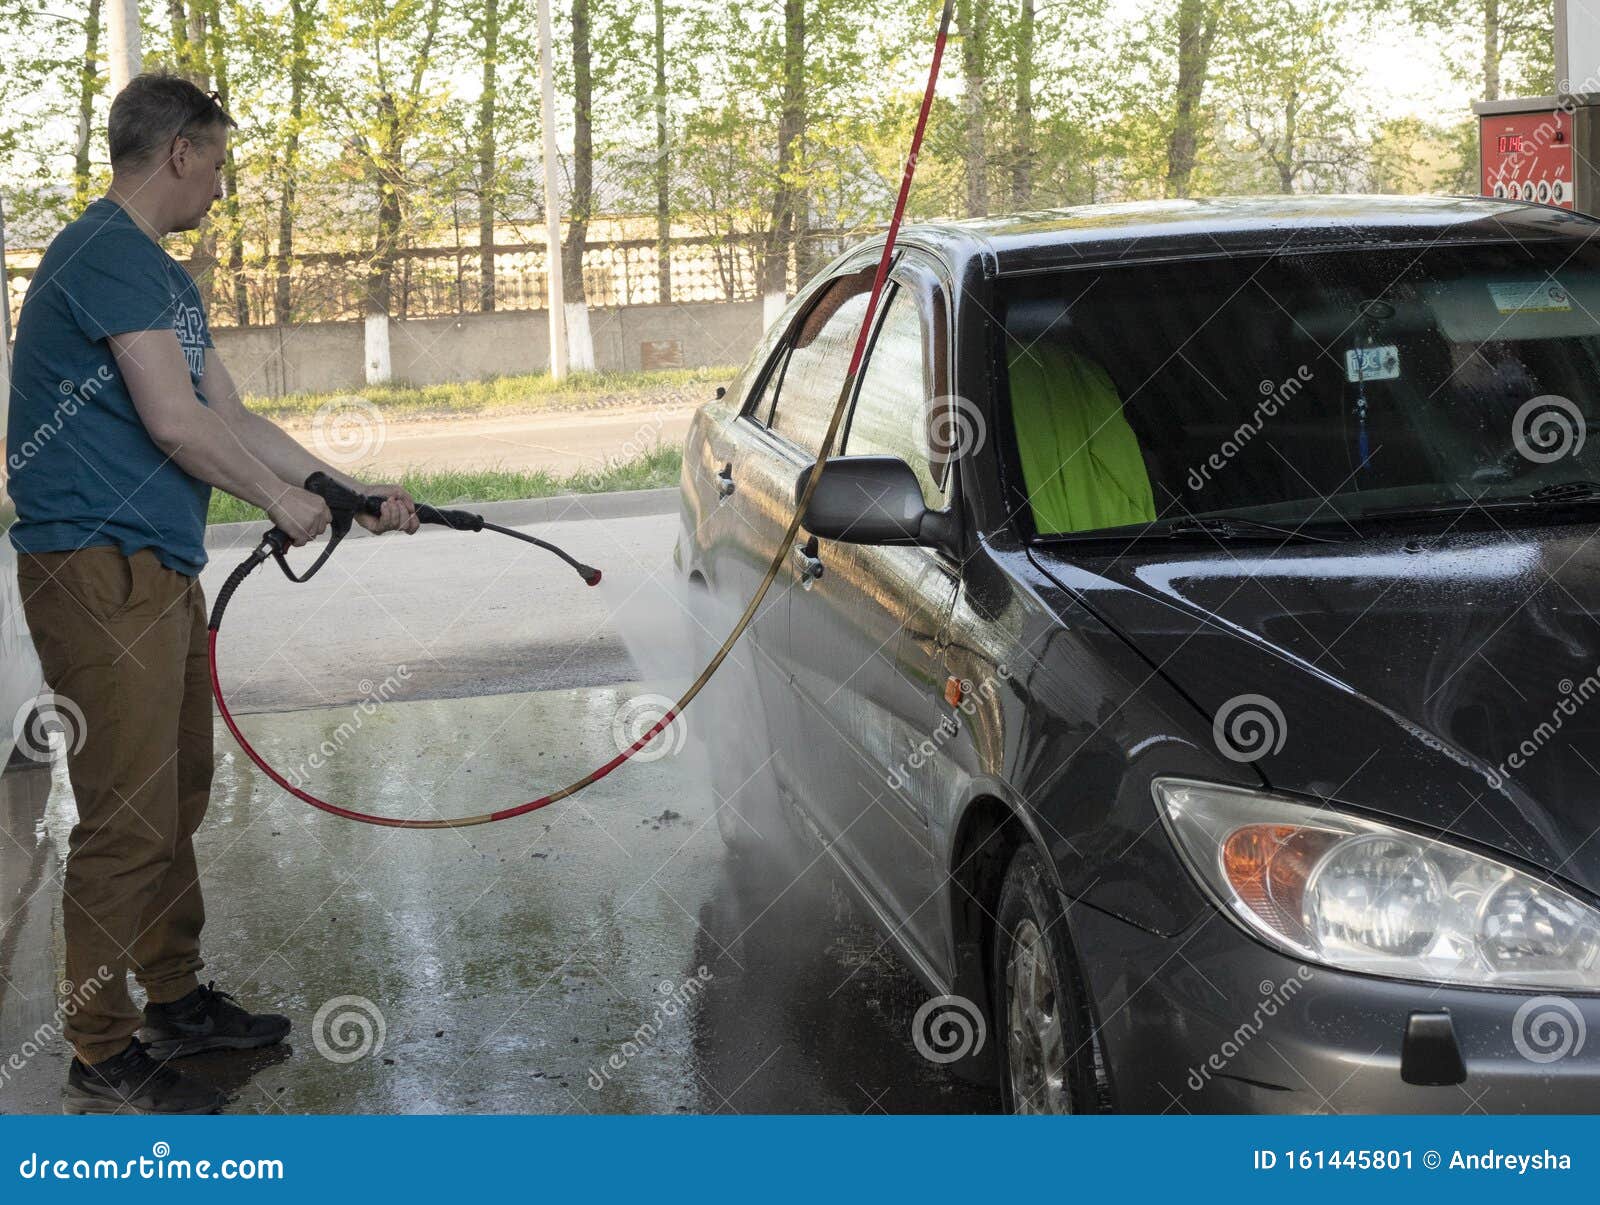 a man washes his car with pressurized water in a car wash